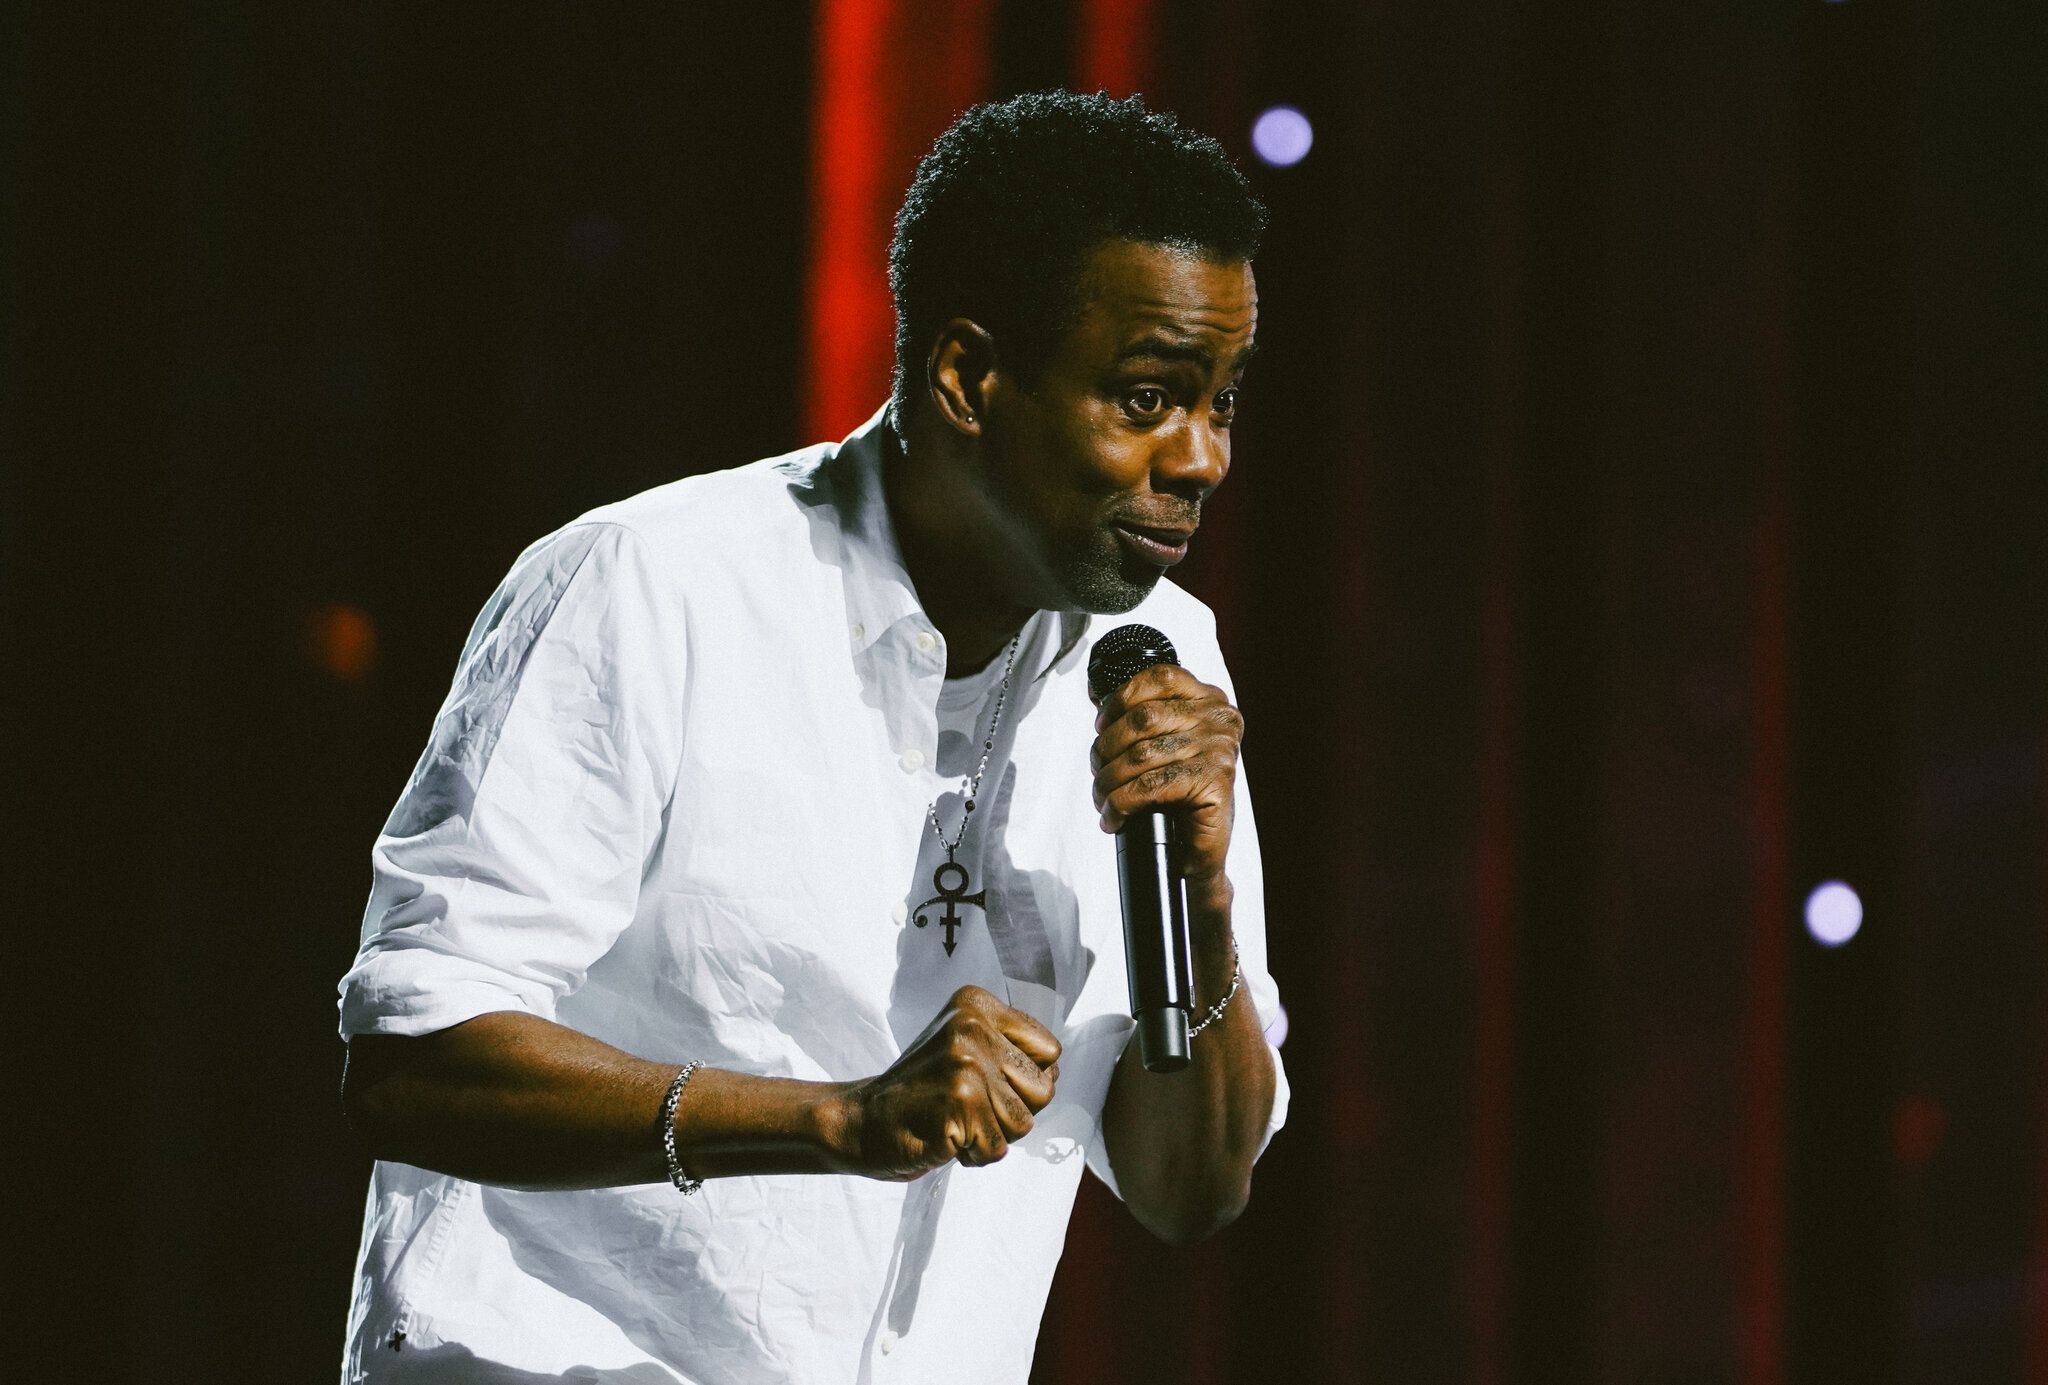 Chris Rock's botched Will Smith joke edited out of Netflix spec